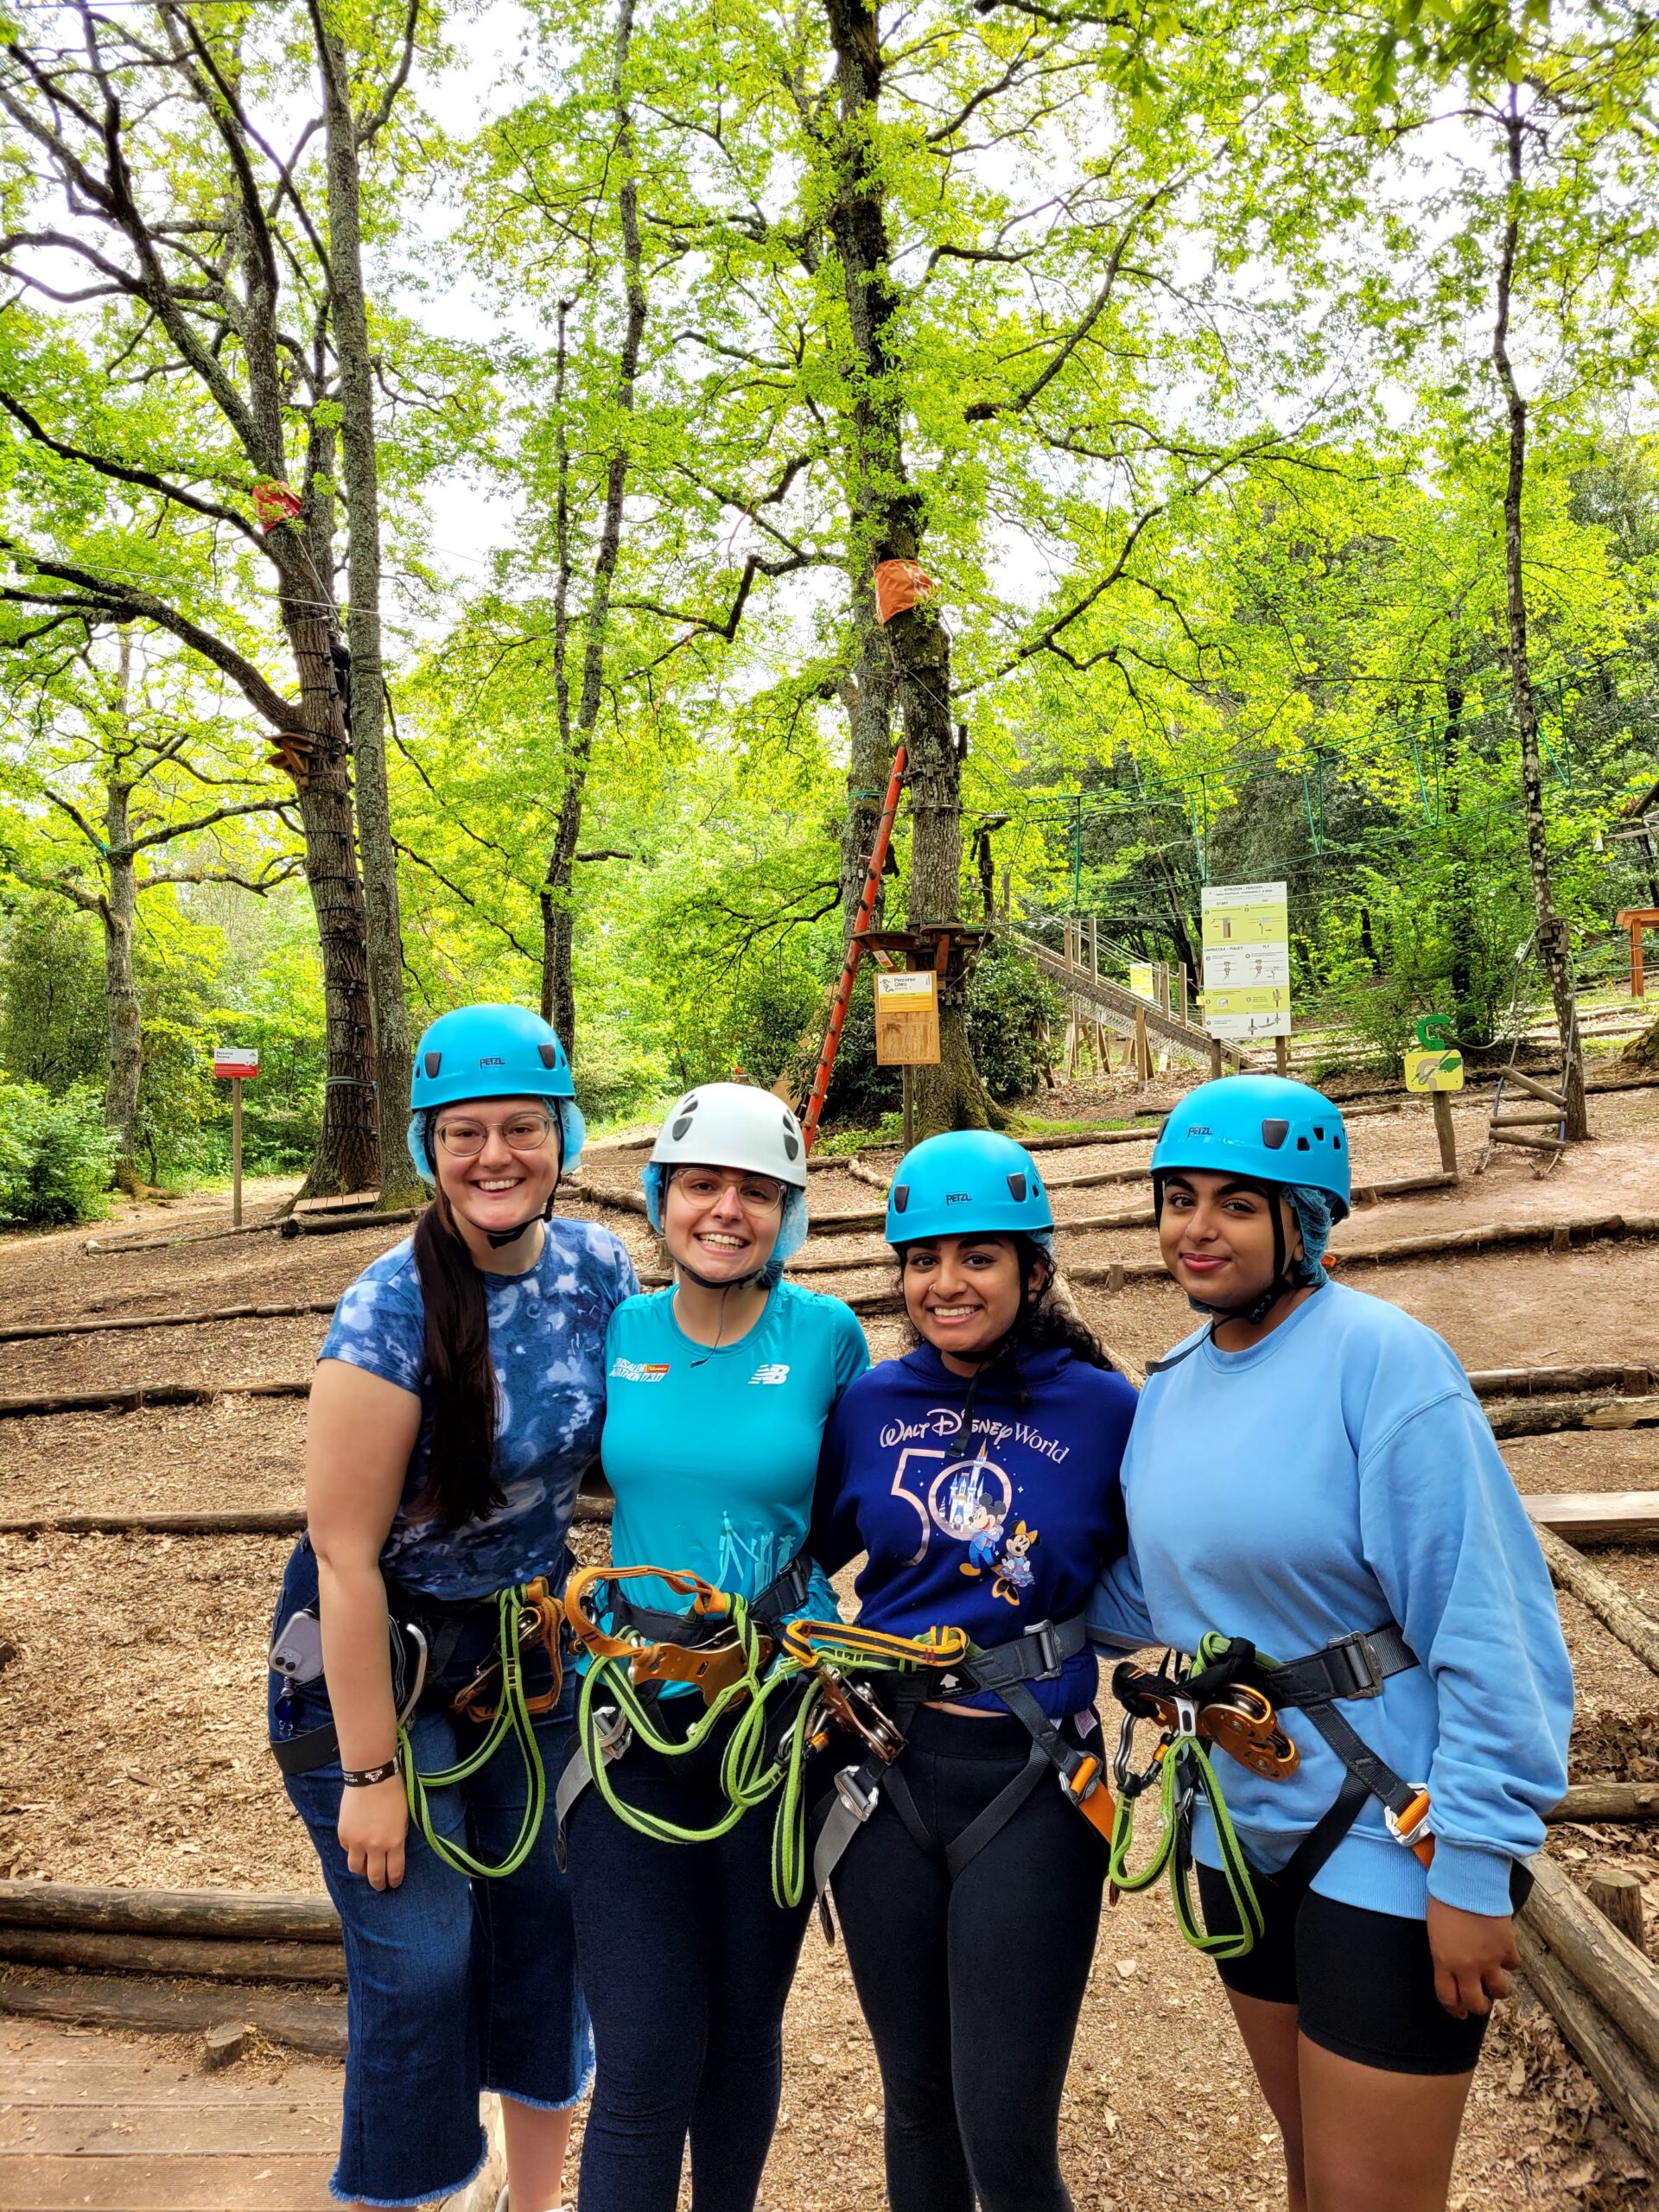 eshika and friends in helmets and harnesses for obstacle course fun in Florence